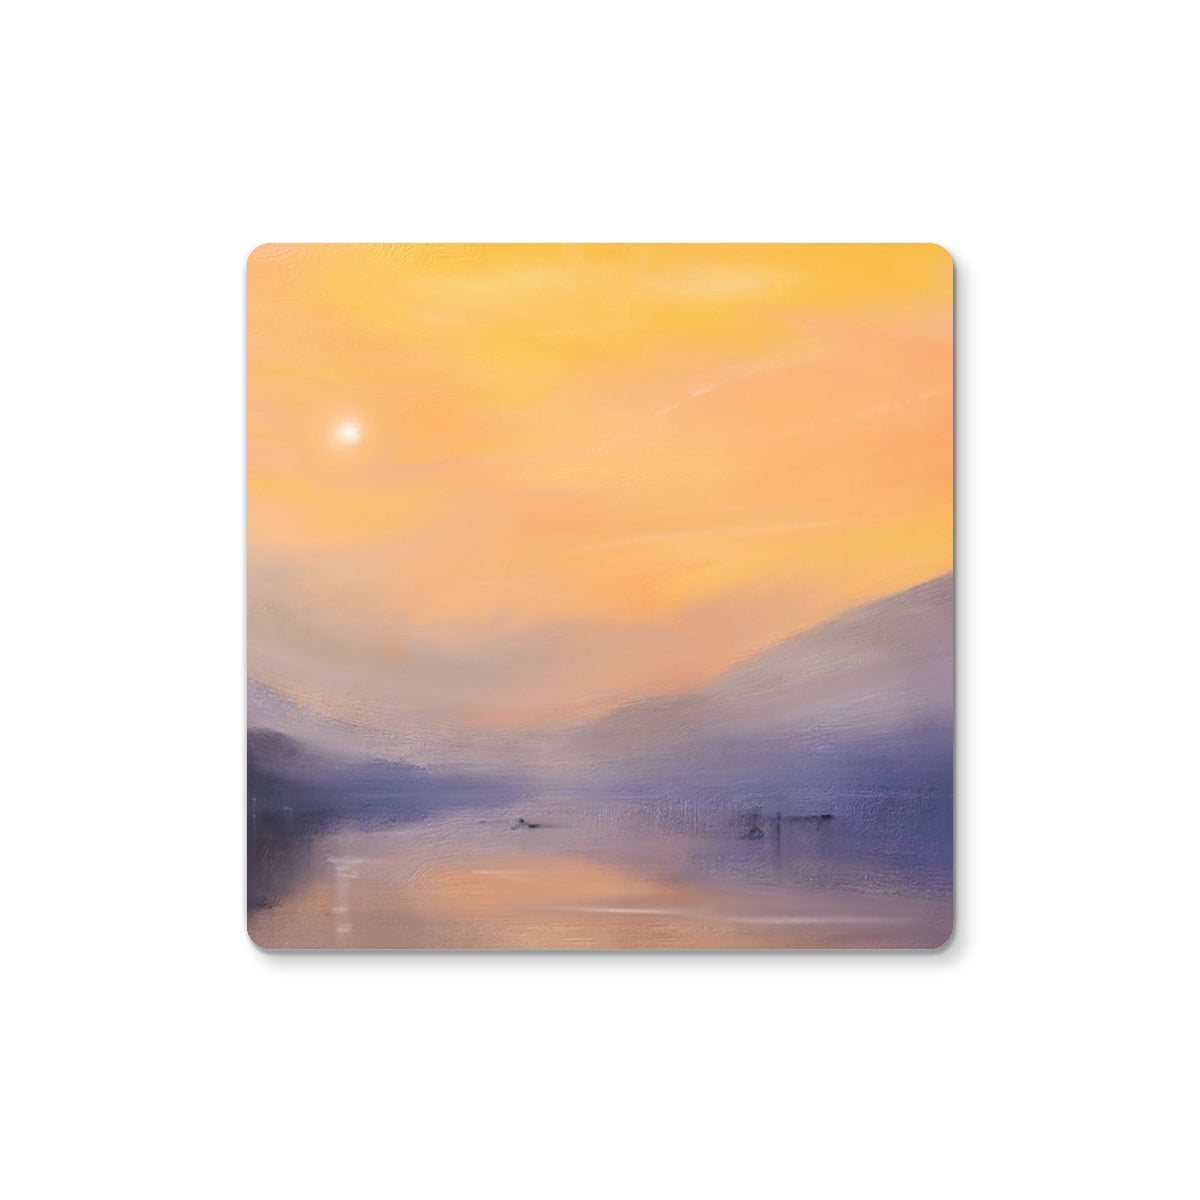 Loch Eck Dusk Art Gifts Coaster-Coasters-Scottish Lochs & Mountains Art Gallery-Single Coaster-Paintings, Prints, Homeware, Art Gifts From Scotland By Scottish Artist Kevin Hunter